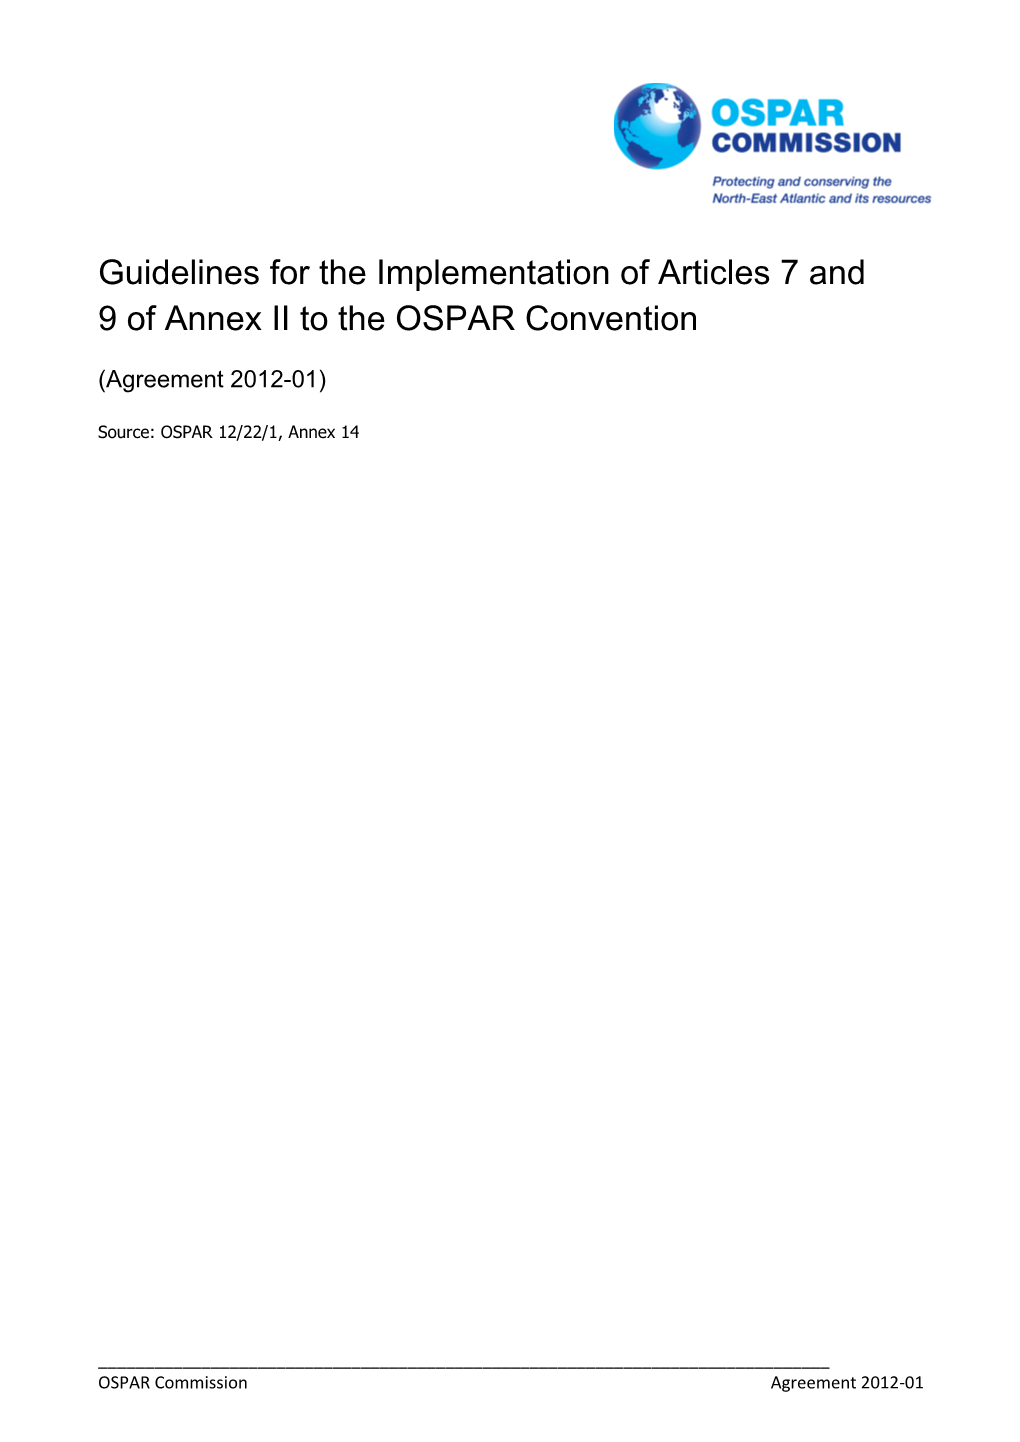 Guidelines for the Implementation of Articles 7 and 9 of Annex II to the OSPAR Convention